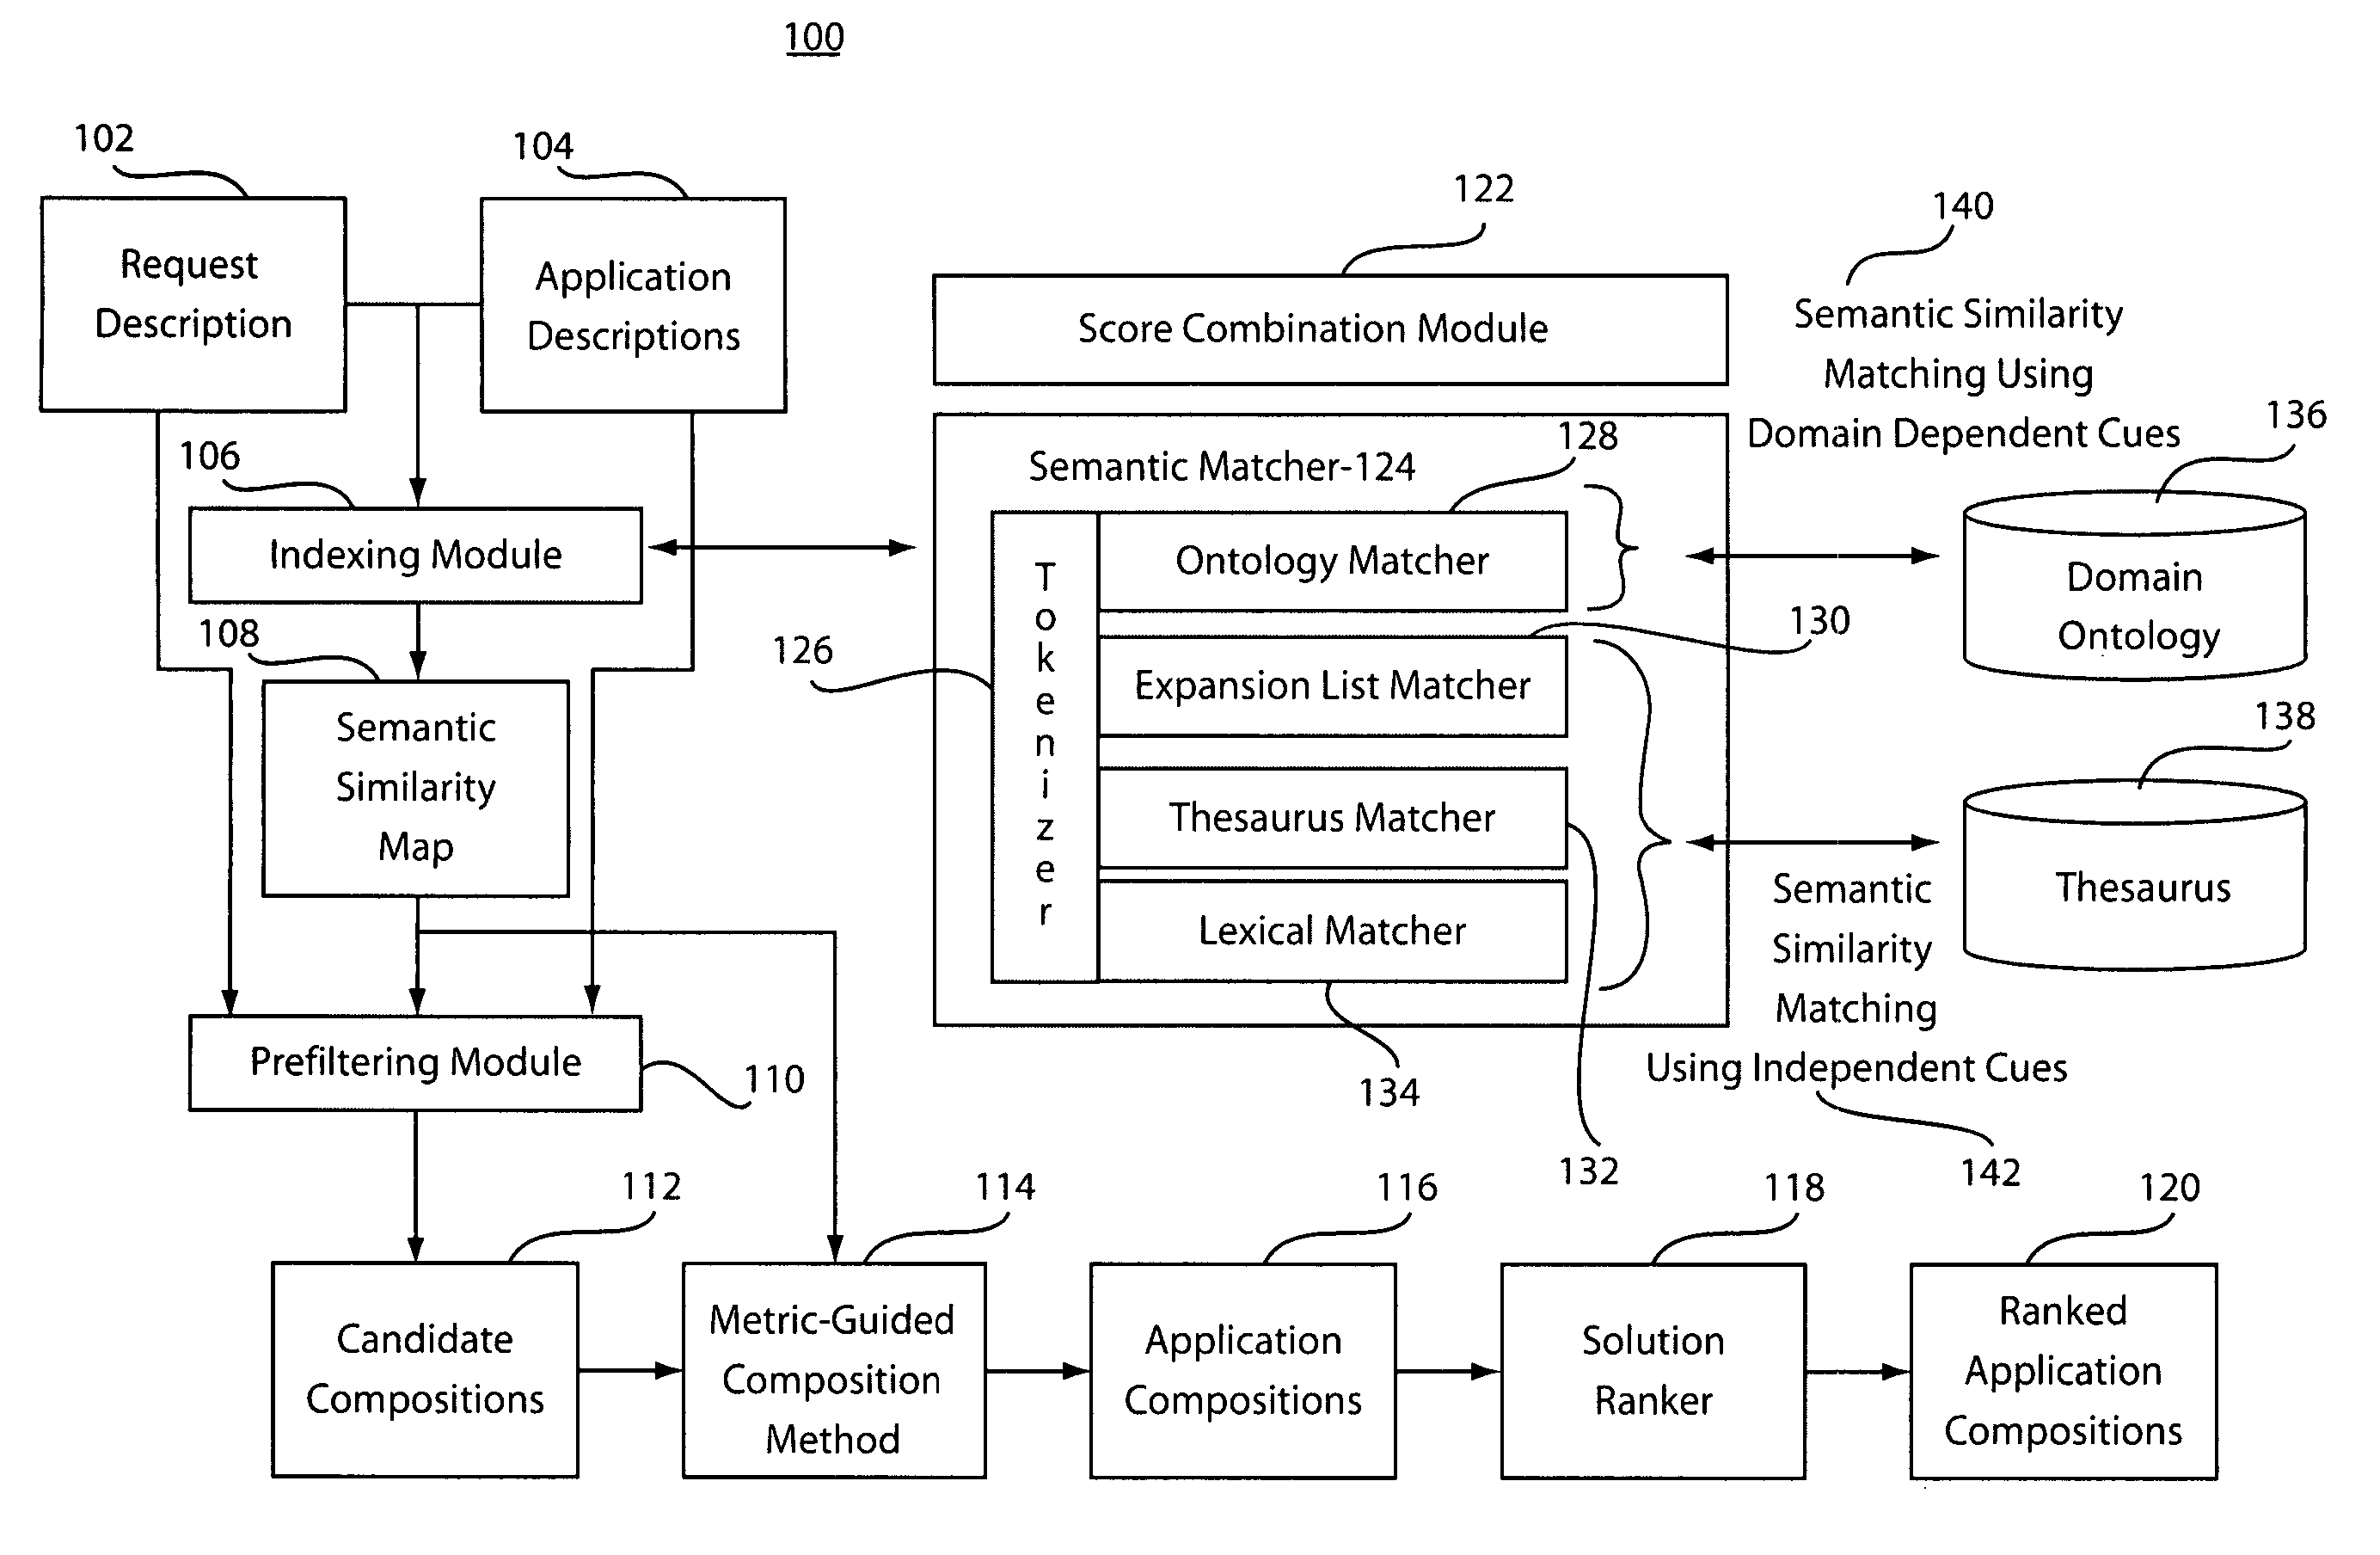 Method and system to compose software applications by combining planning with semantic reasoning